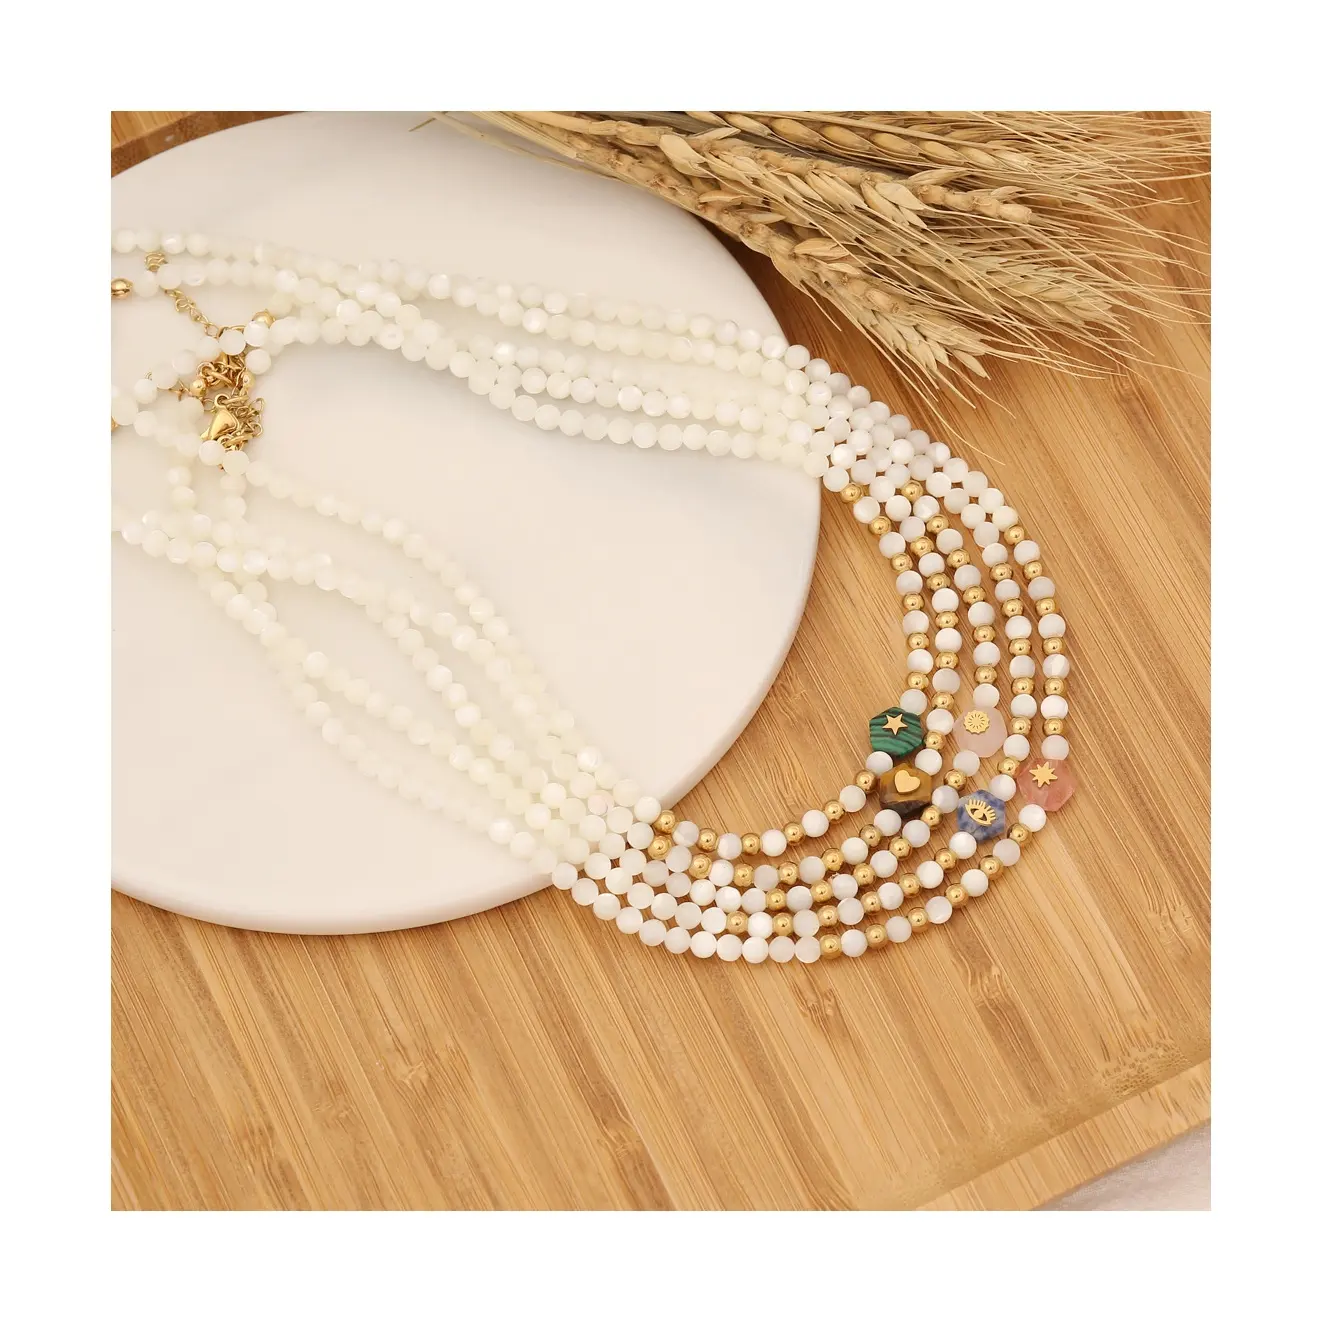 Hanpai New Design Natural Stone Jewelry Necklace Stone Necklaces Beaded Stainless Steel Necklaces For Women